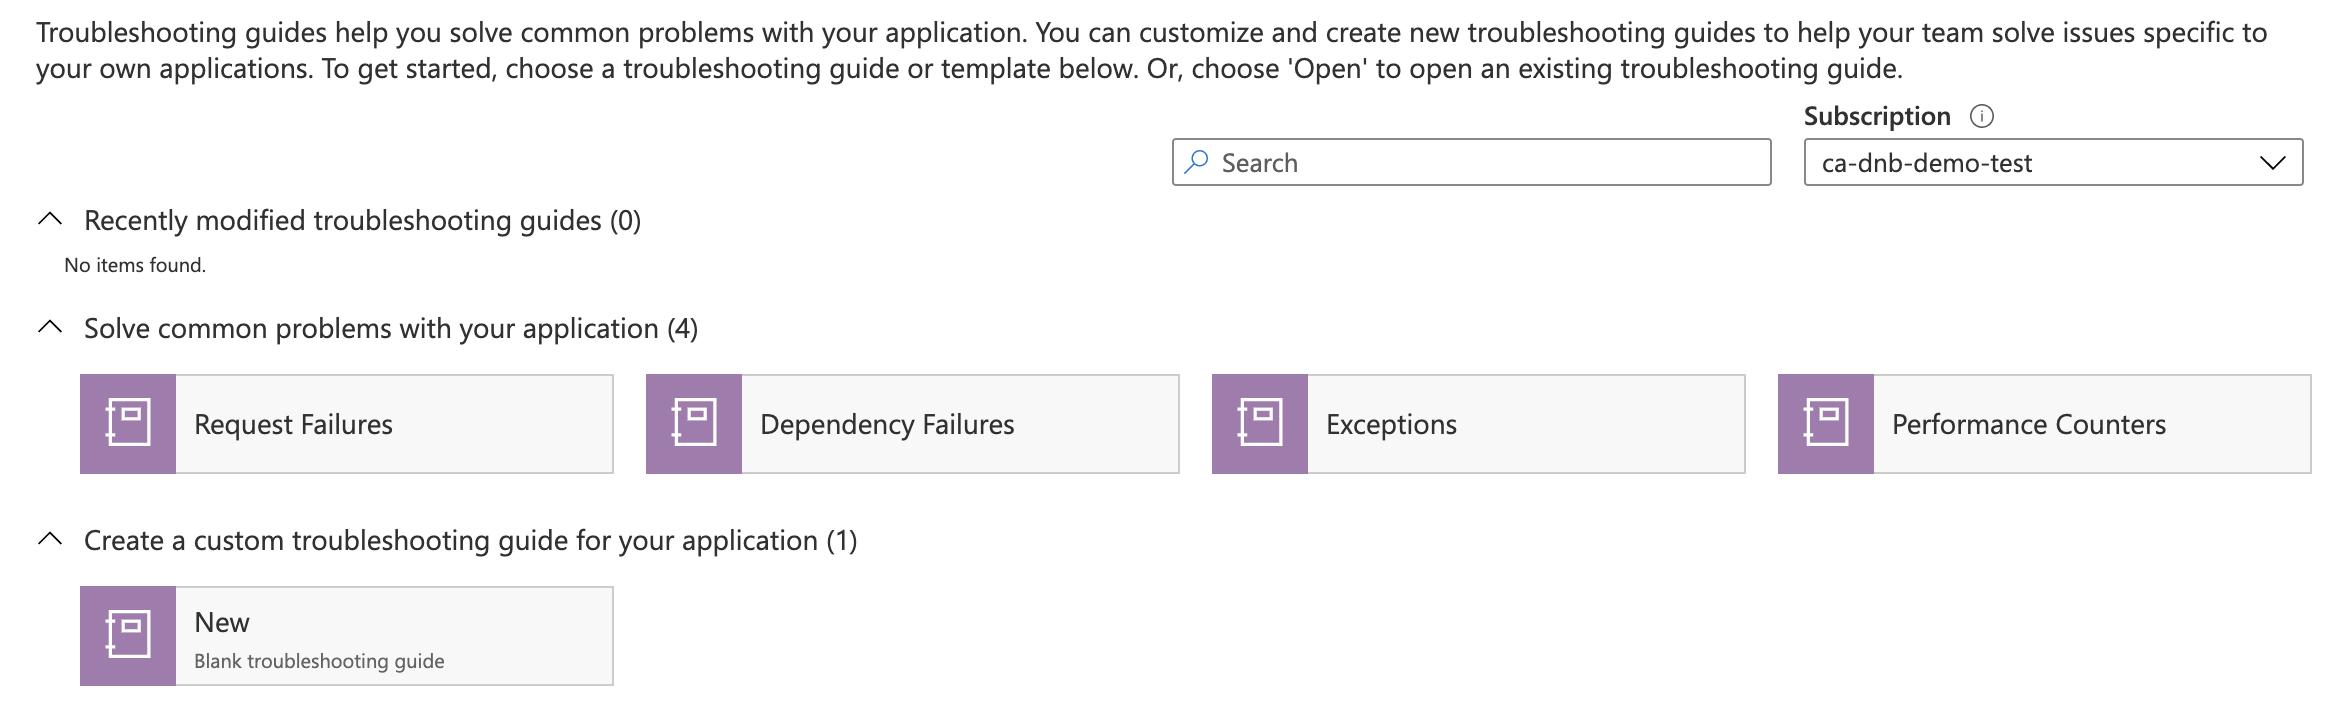 Screenshot of default example troubleshooting guides as found in the Azure portal.